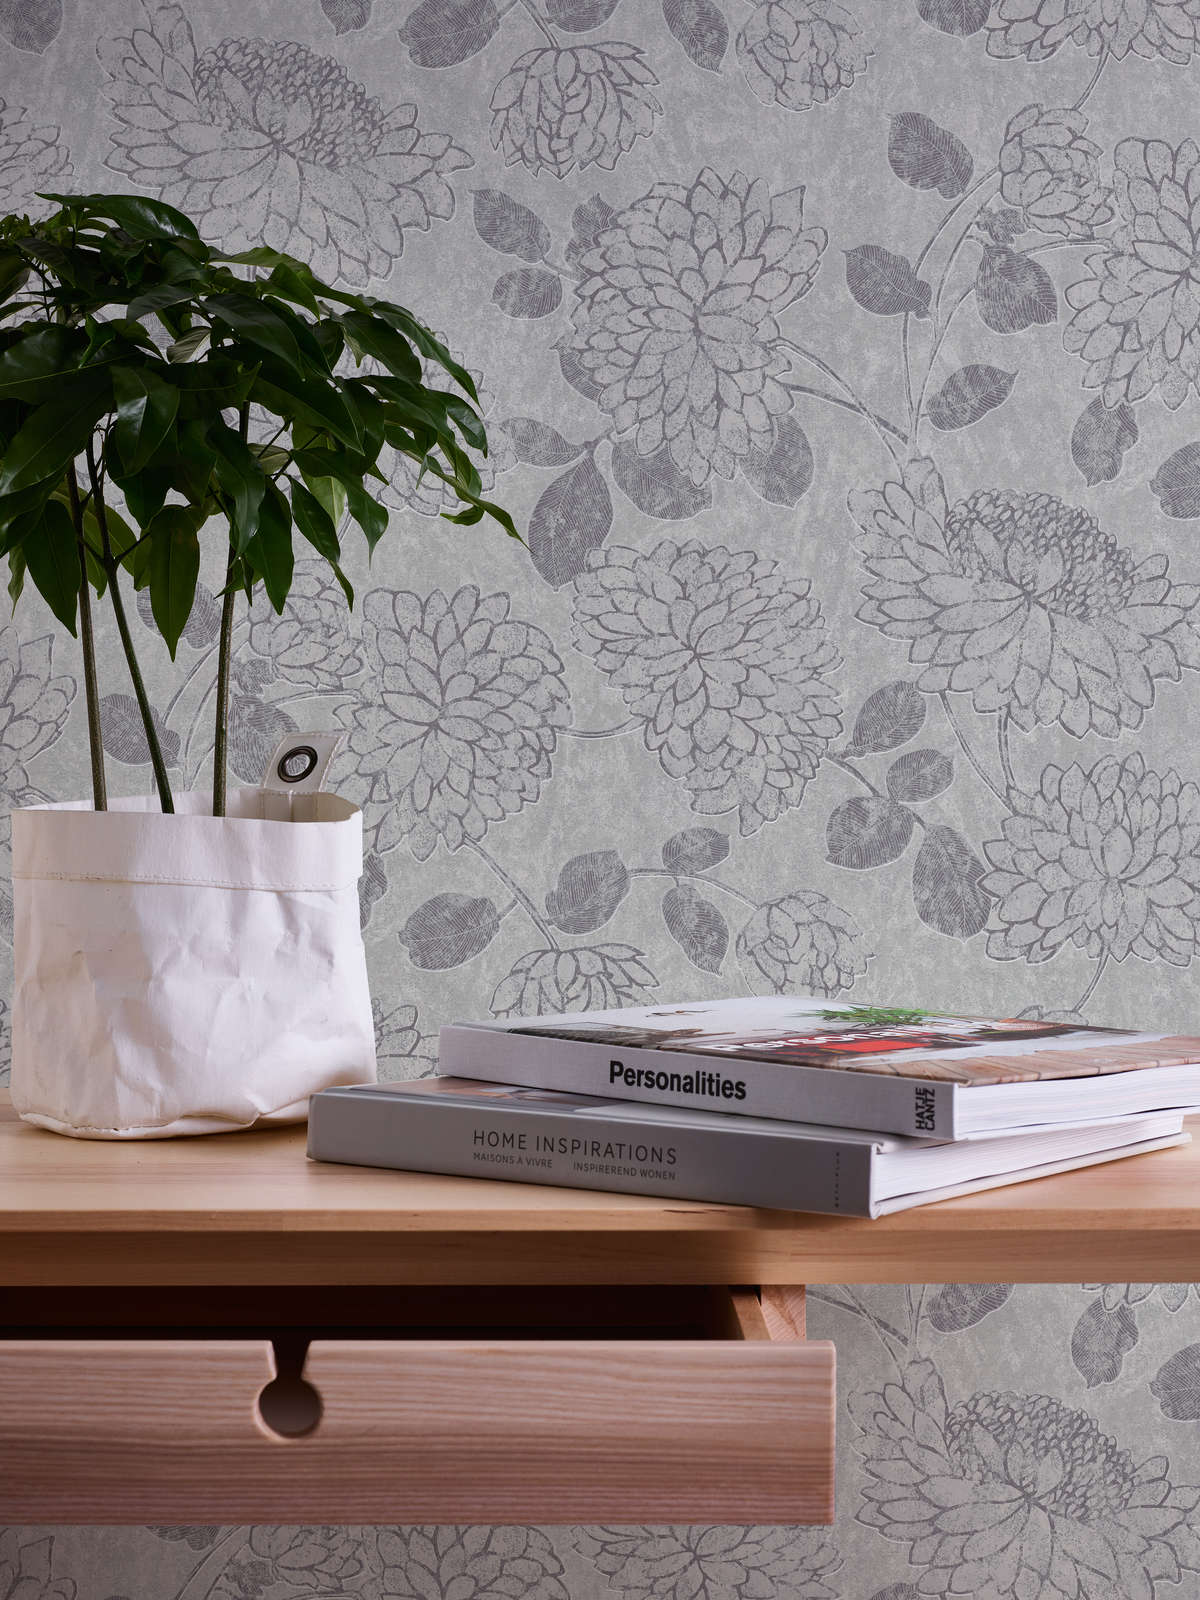             Non-woven wallpaper with floral pattern and gloss effect - light grey, silver
        